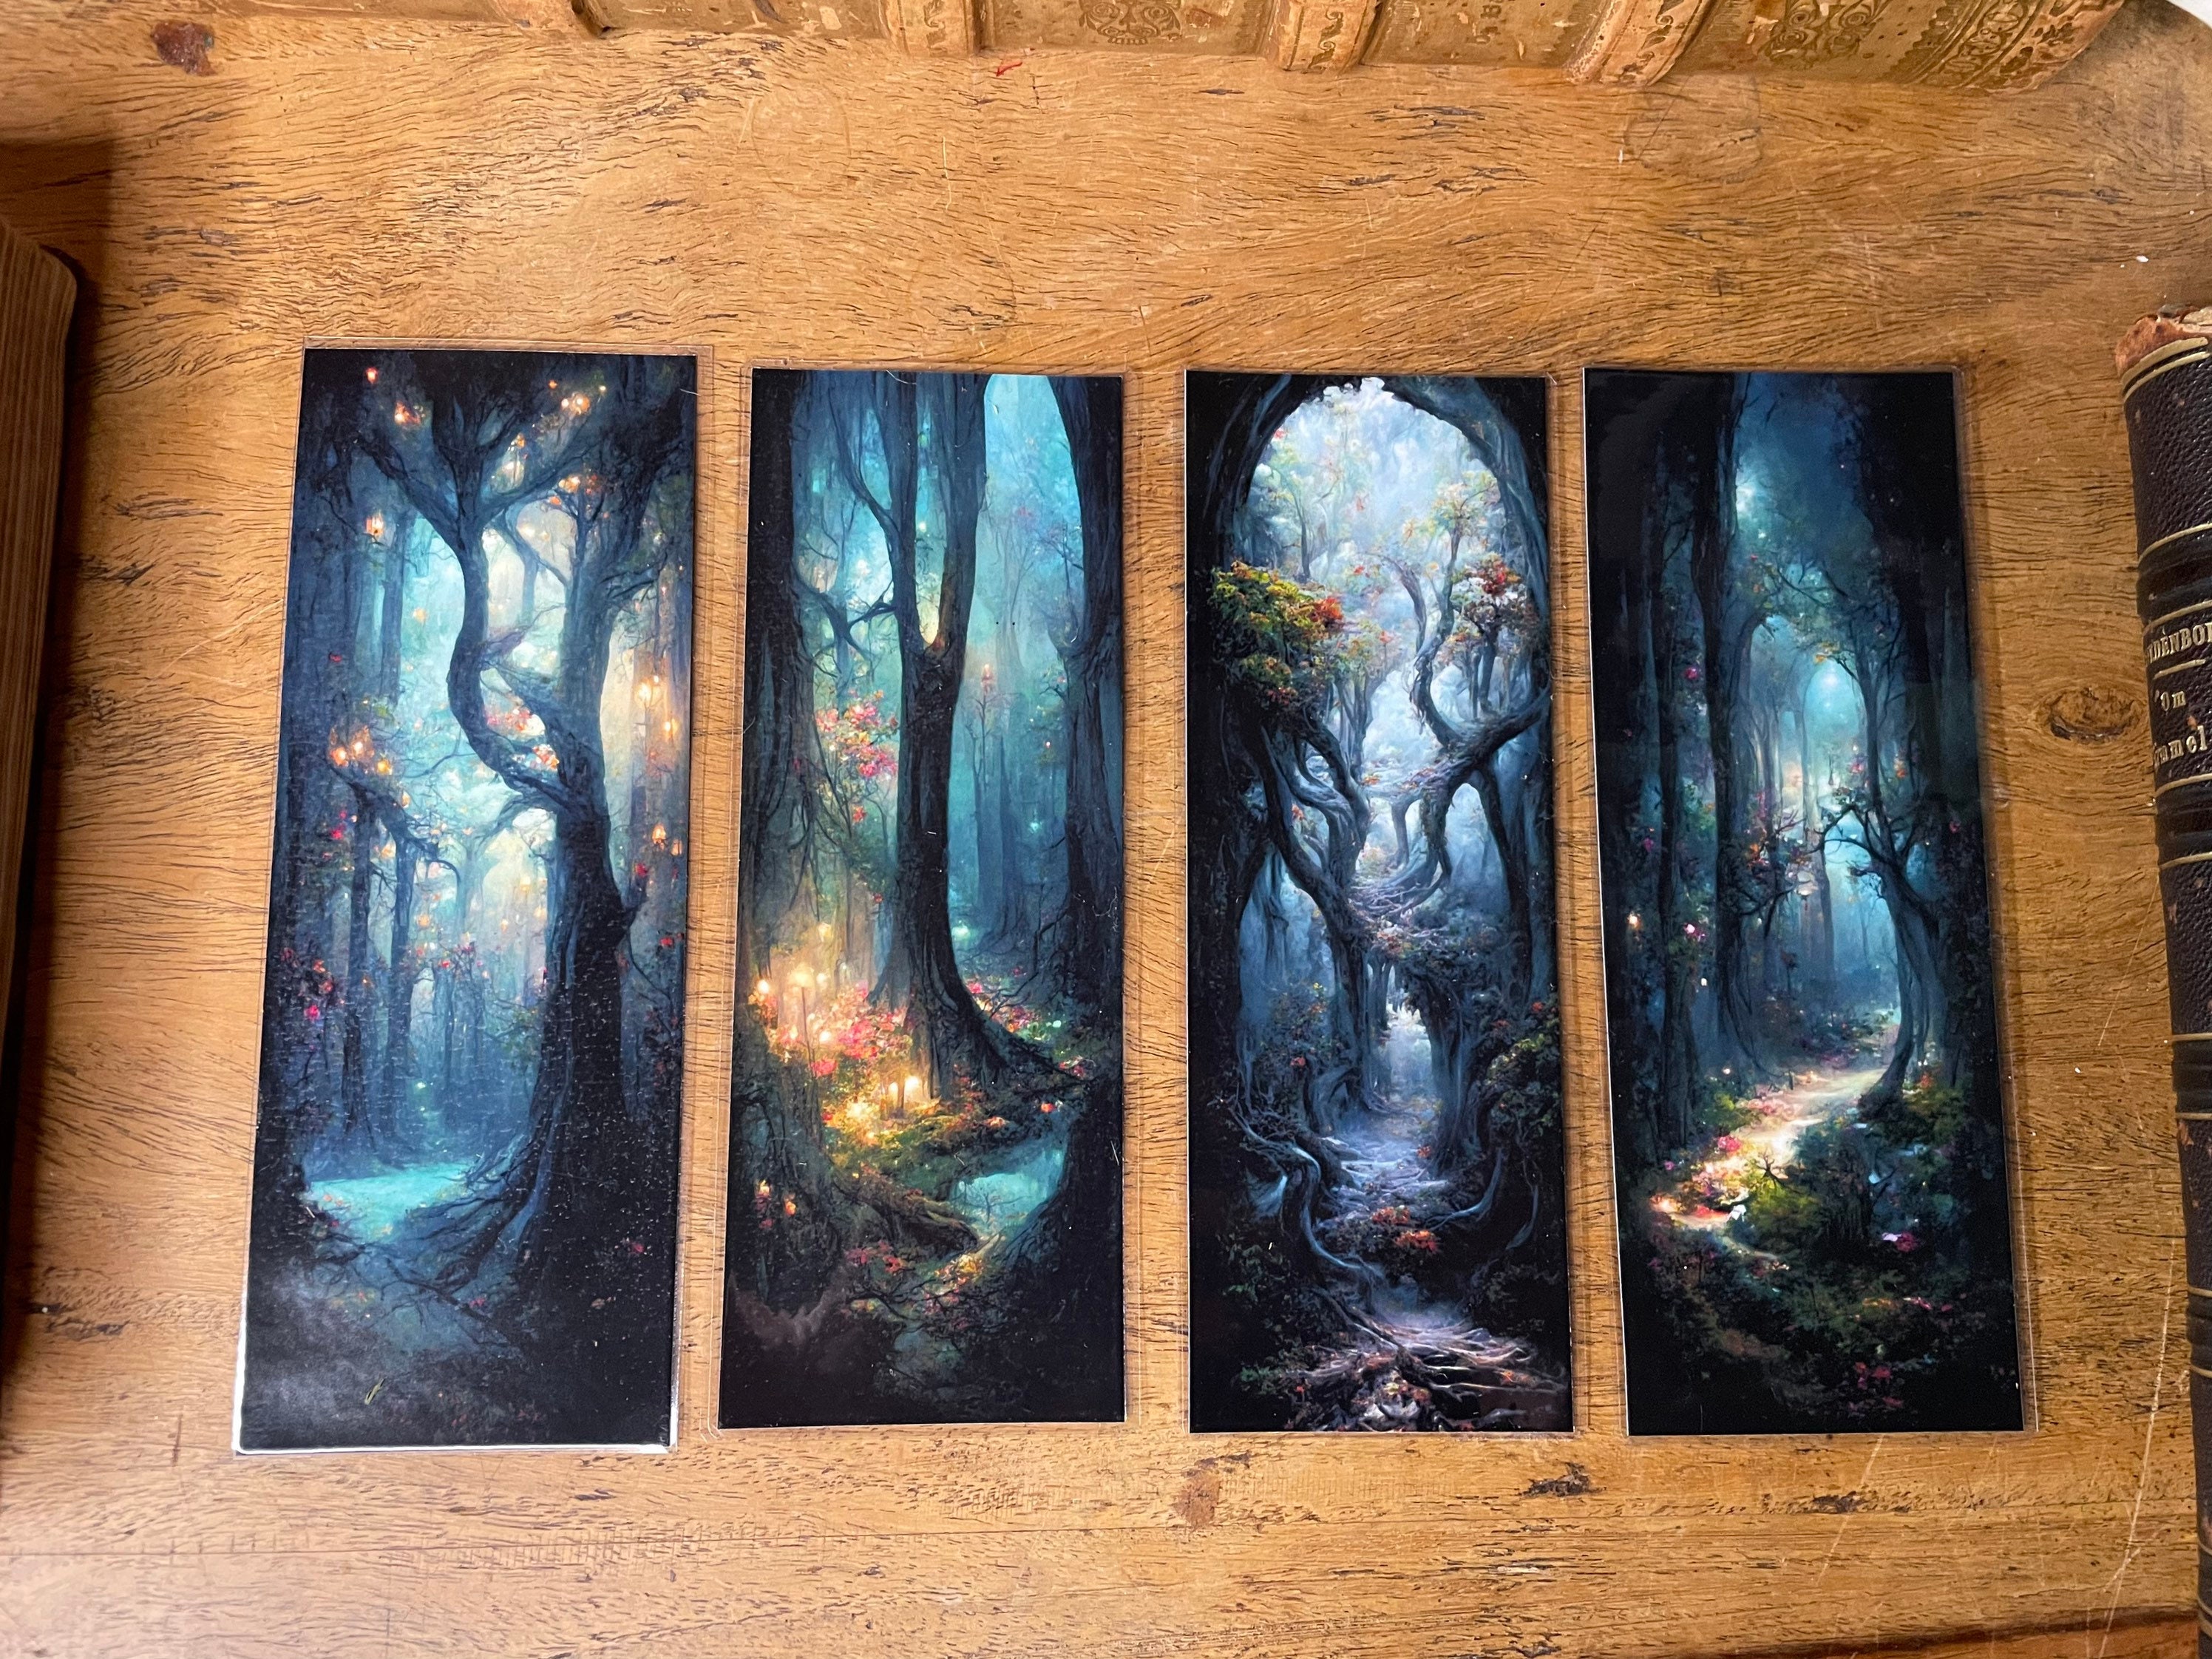 Signed: AFTER THE FOREST Hand-painted Edges Kell Woods Fantasy Books  Hardback Books Sprayed Book Edges Special Edition 